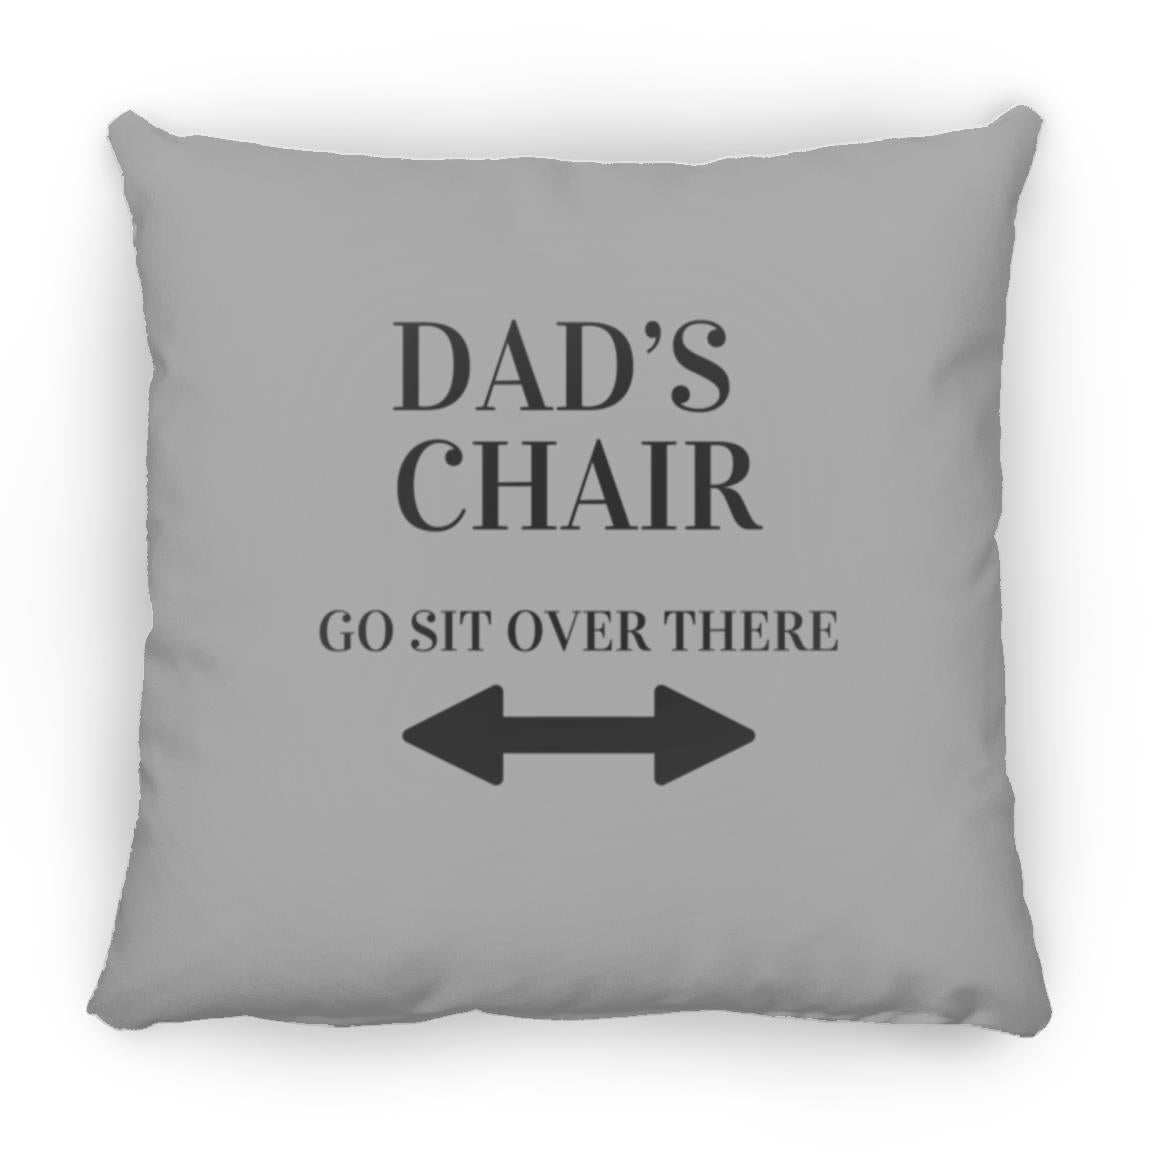 Get trendy with DAD’S CHAIR Dad's Chair Medium Square Pillow - Housewares available at Good Gift Company. Grab yours for $23 today!